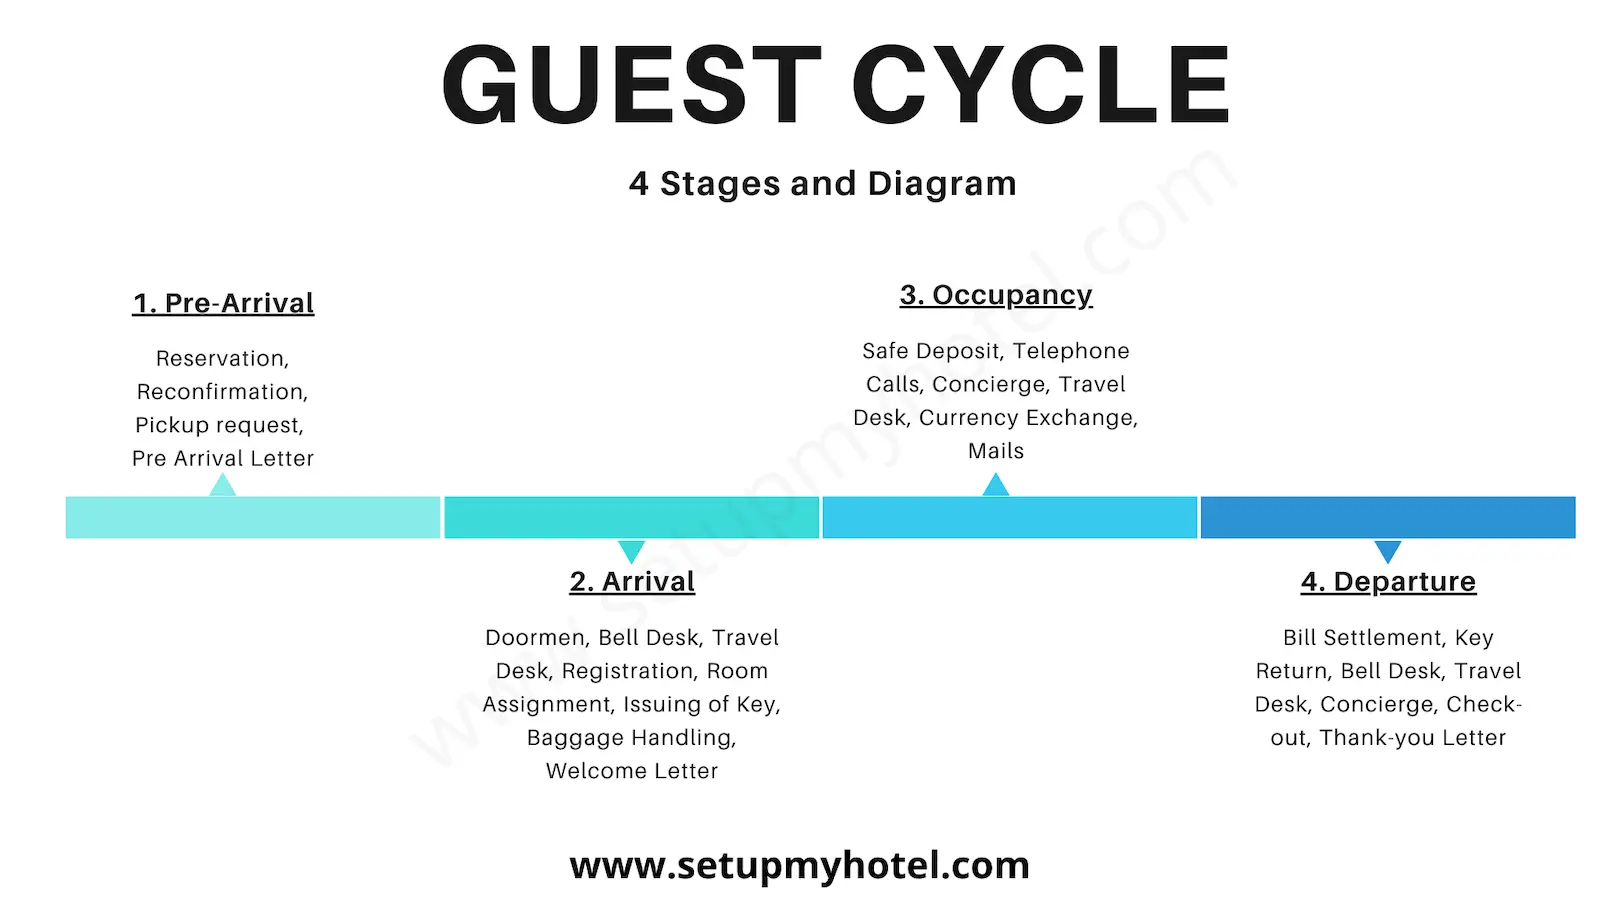 The Guest Cycle in hotel - 4 Stages and Diagram 1. Pre- Arrival, 2. Arrival, 3. Occupancy, 4. Departure